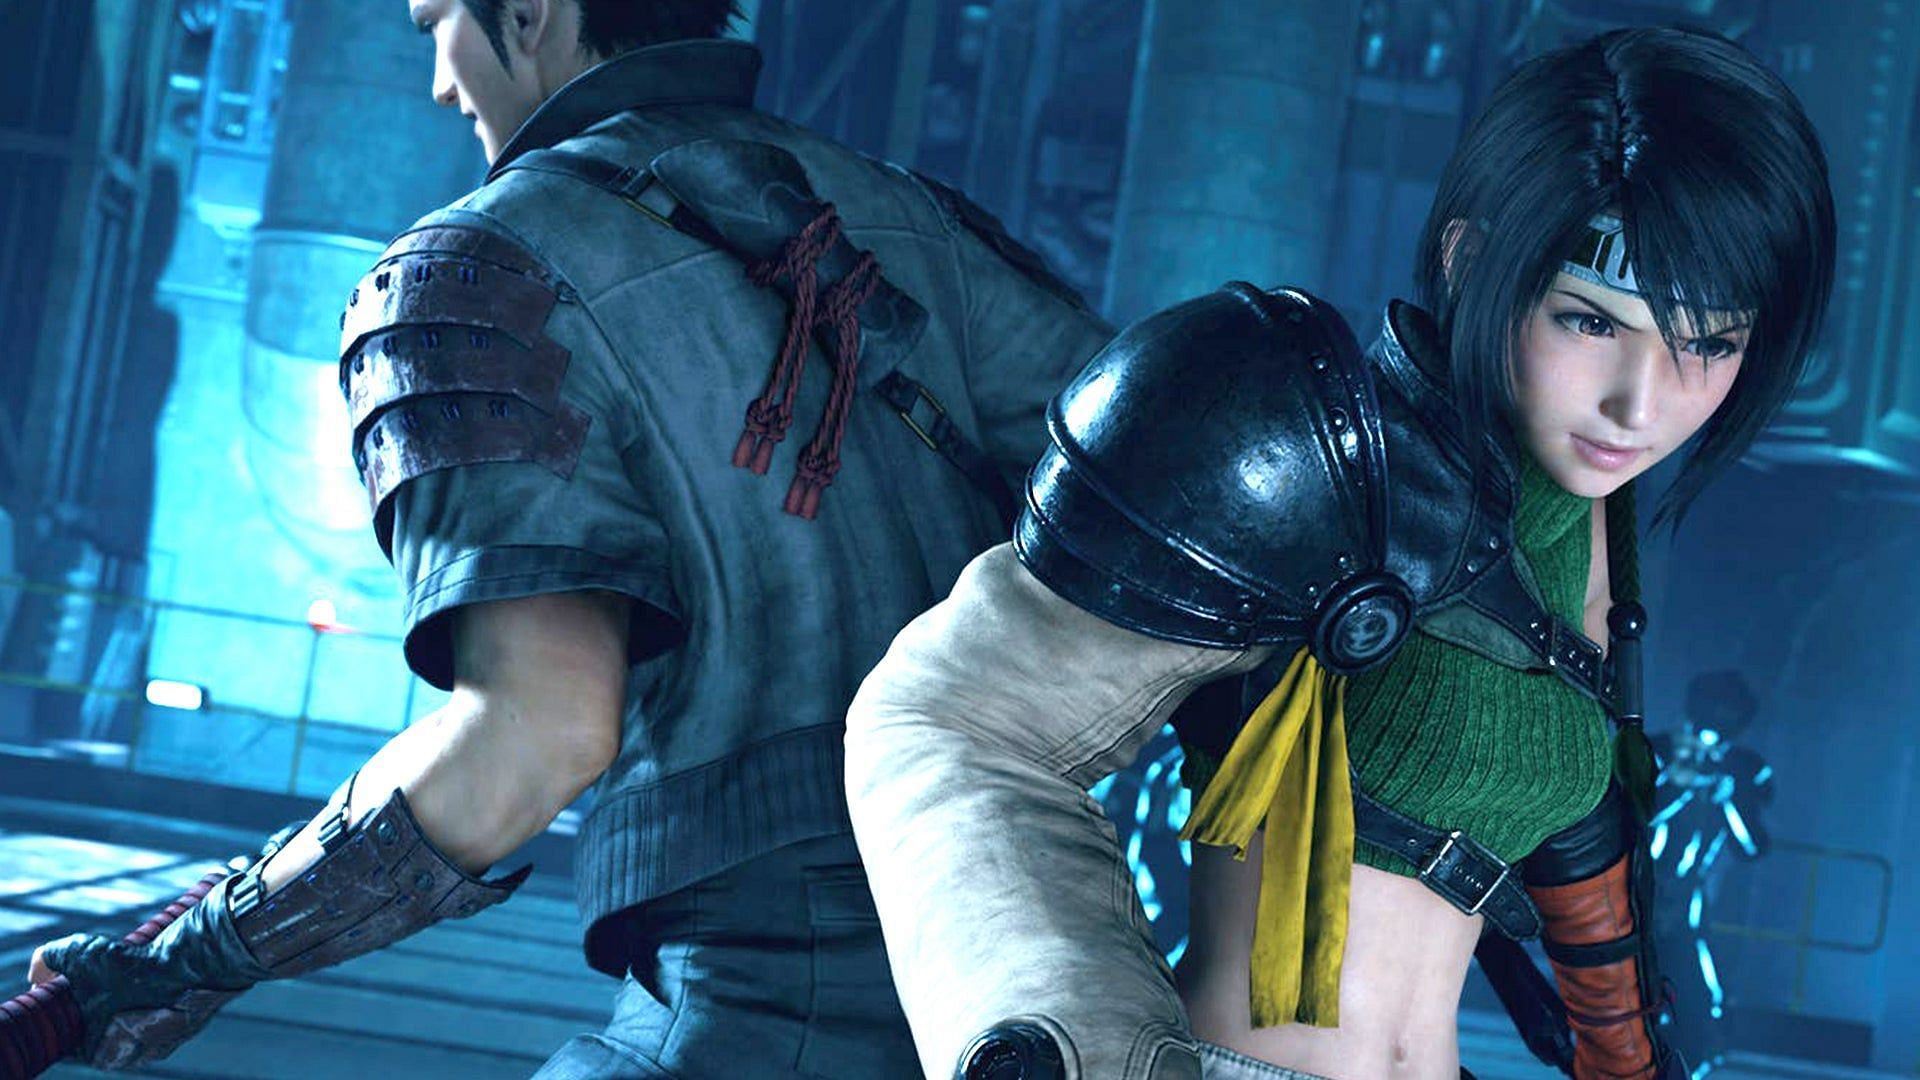 Final Fantasy VII Remake fans might get some exciting news soon, courtesy of Square Enix (Image via Square Enix)